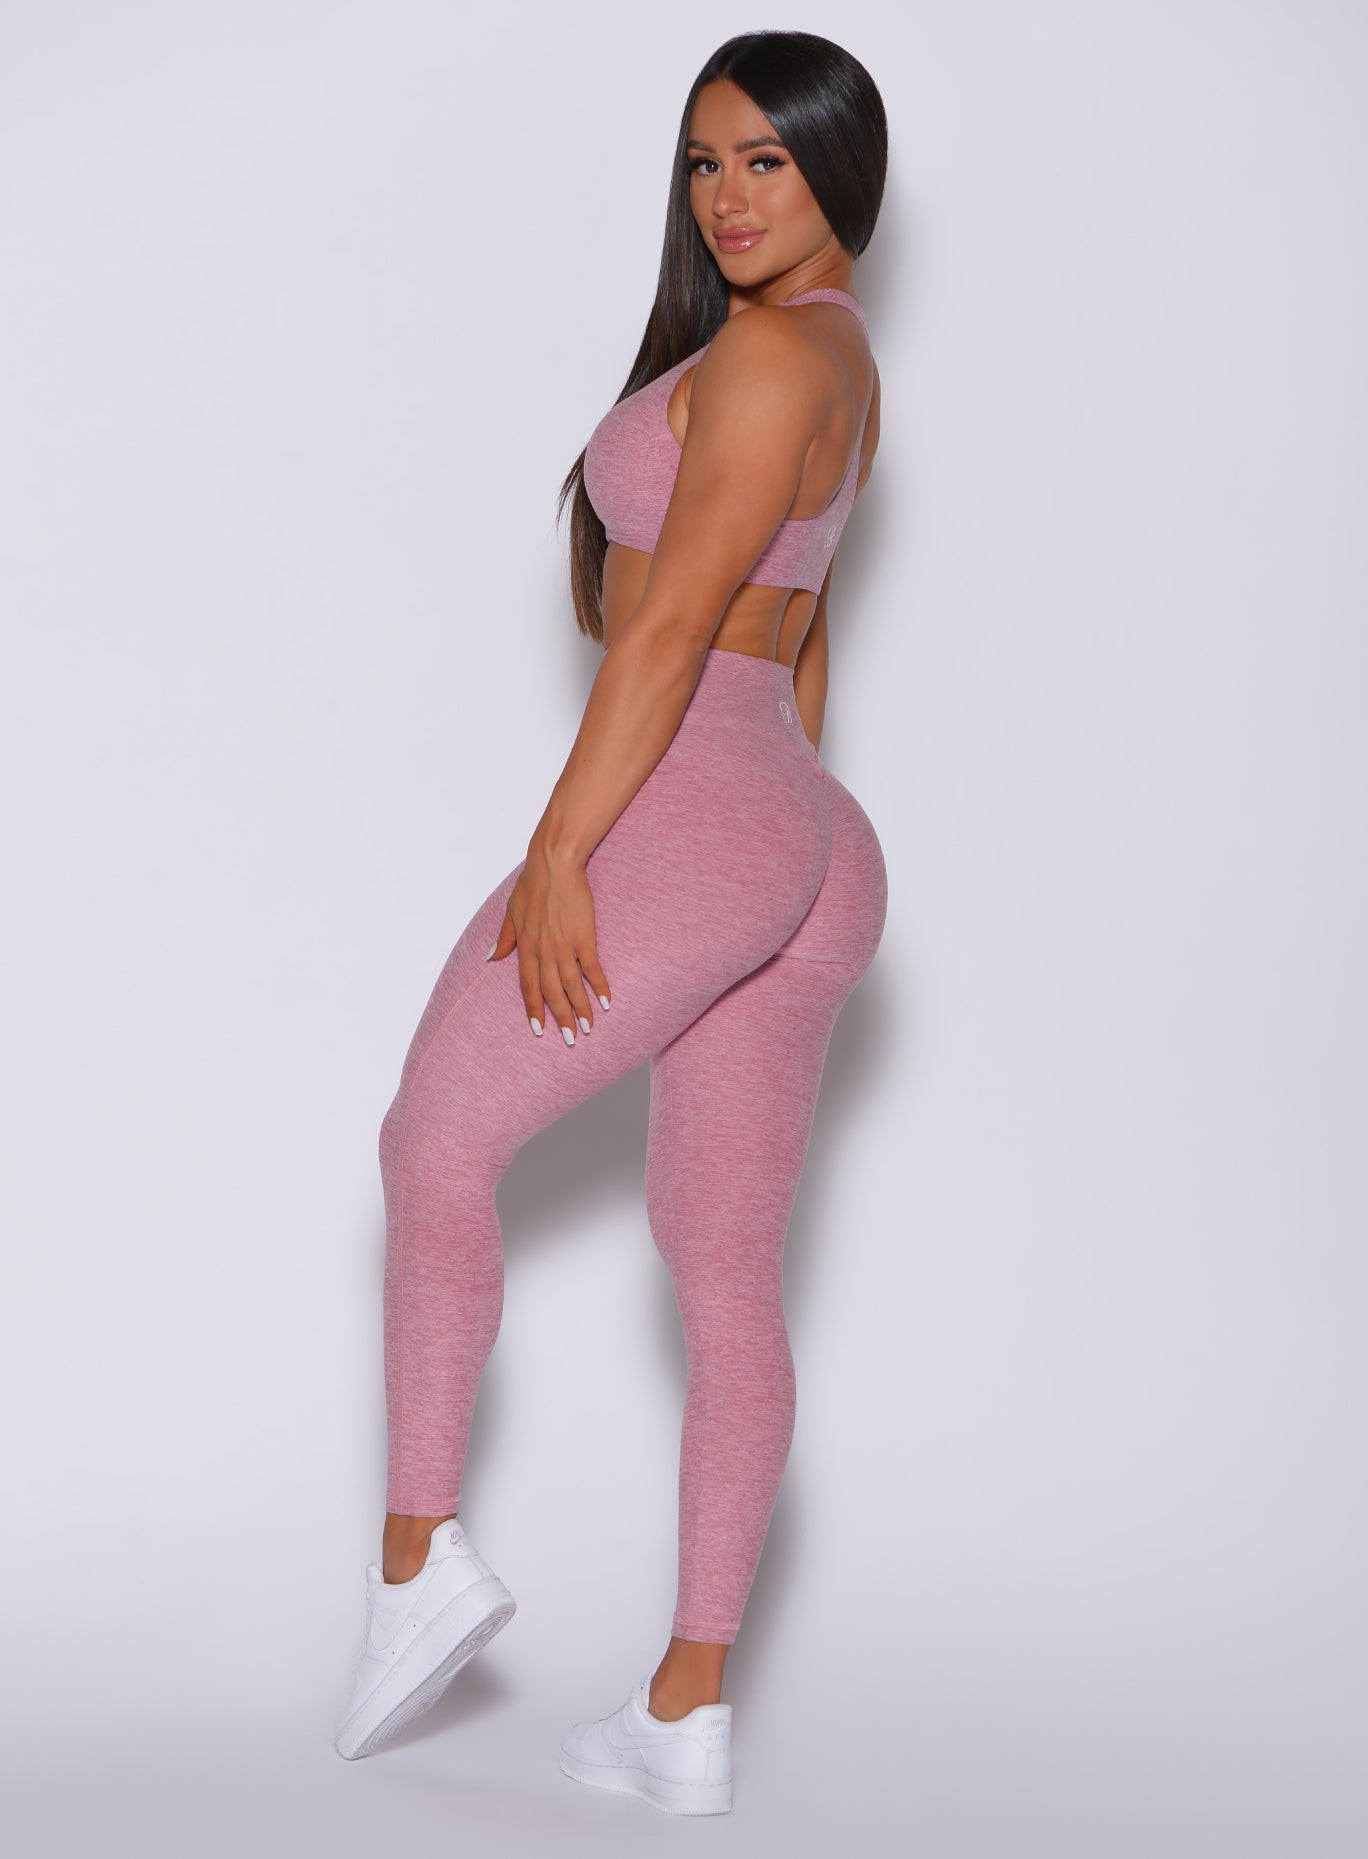 Left side profile view of a model facing to her left wearing our V scrunch leggings in rose blush color and a matching bra